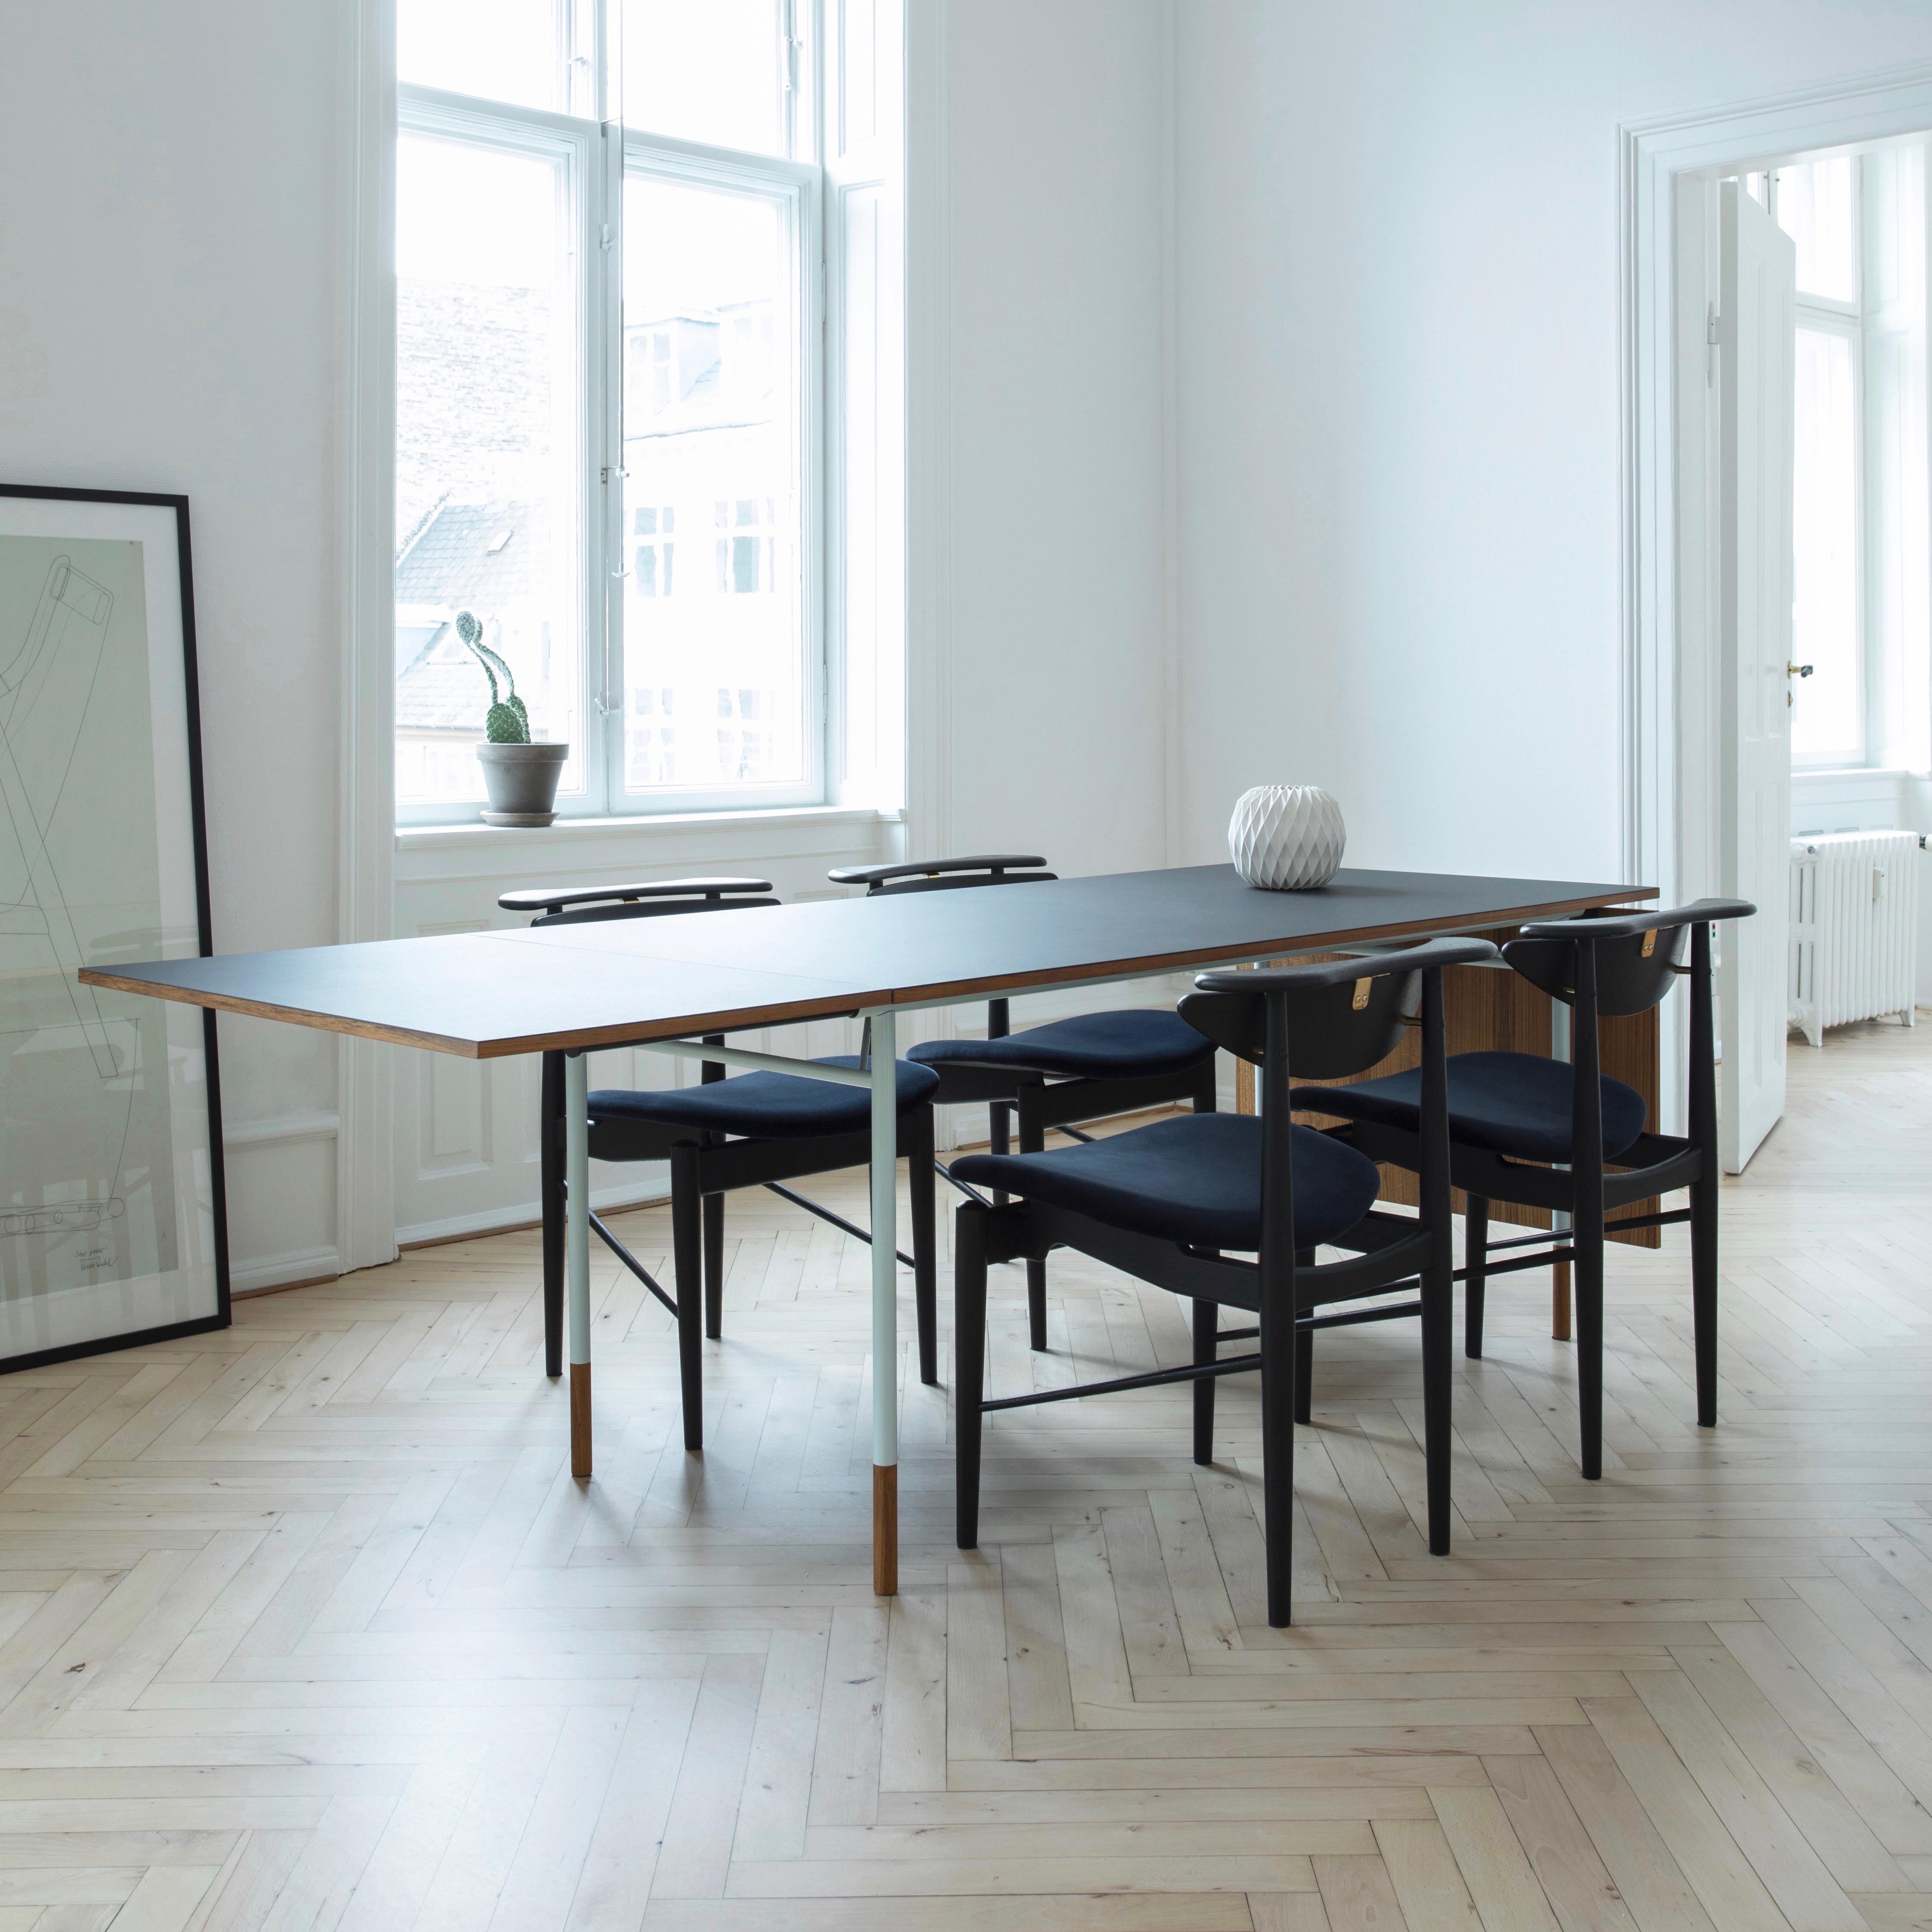 Finn Juhl Nyhavn Dining Table with Two Drop Leaves, Lino and Wood 11